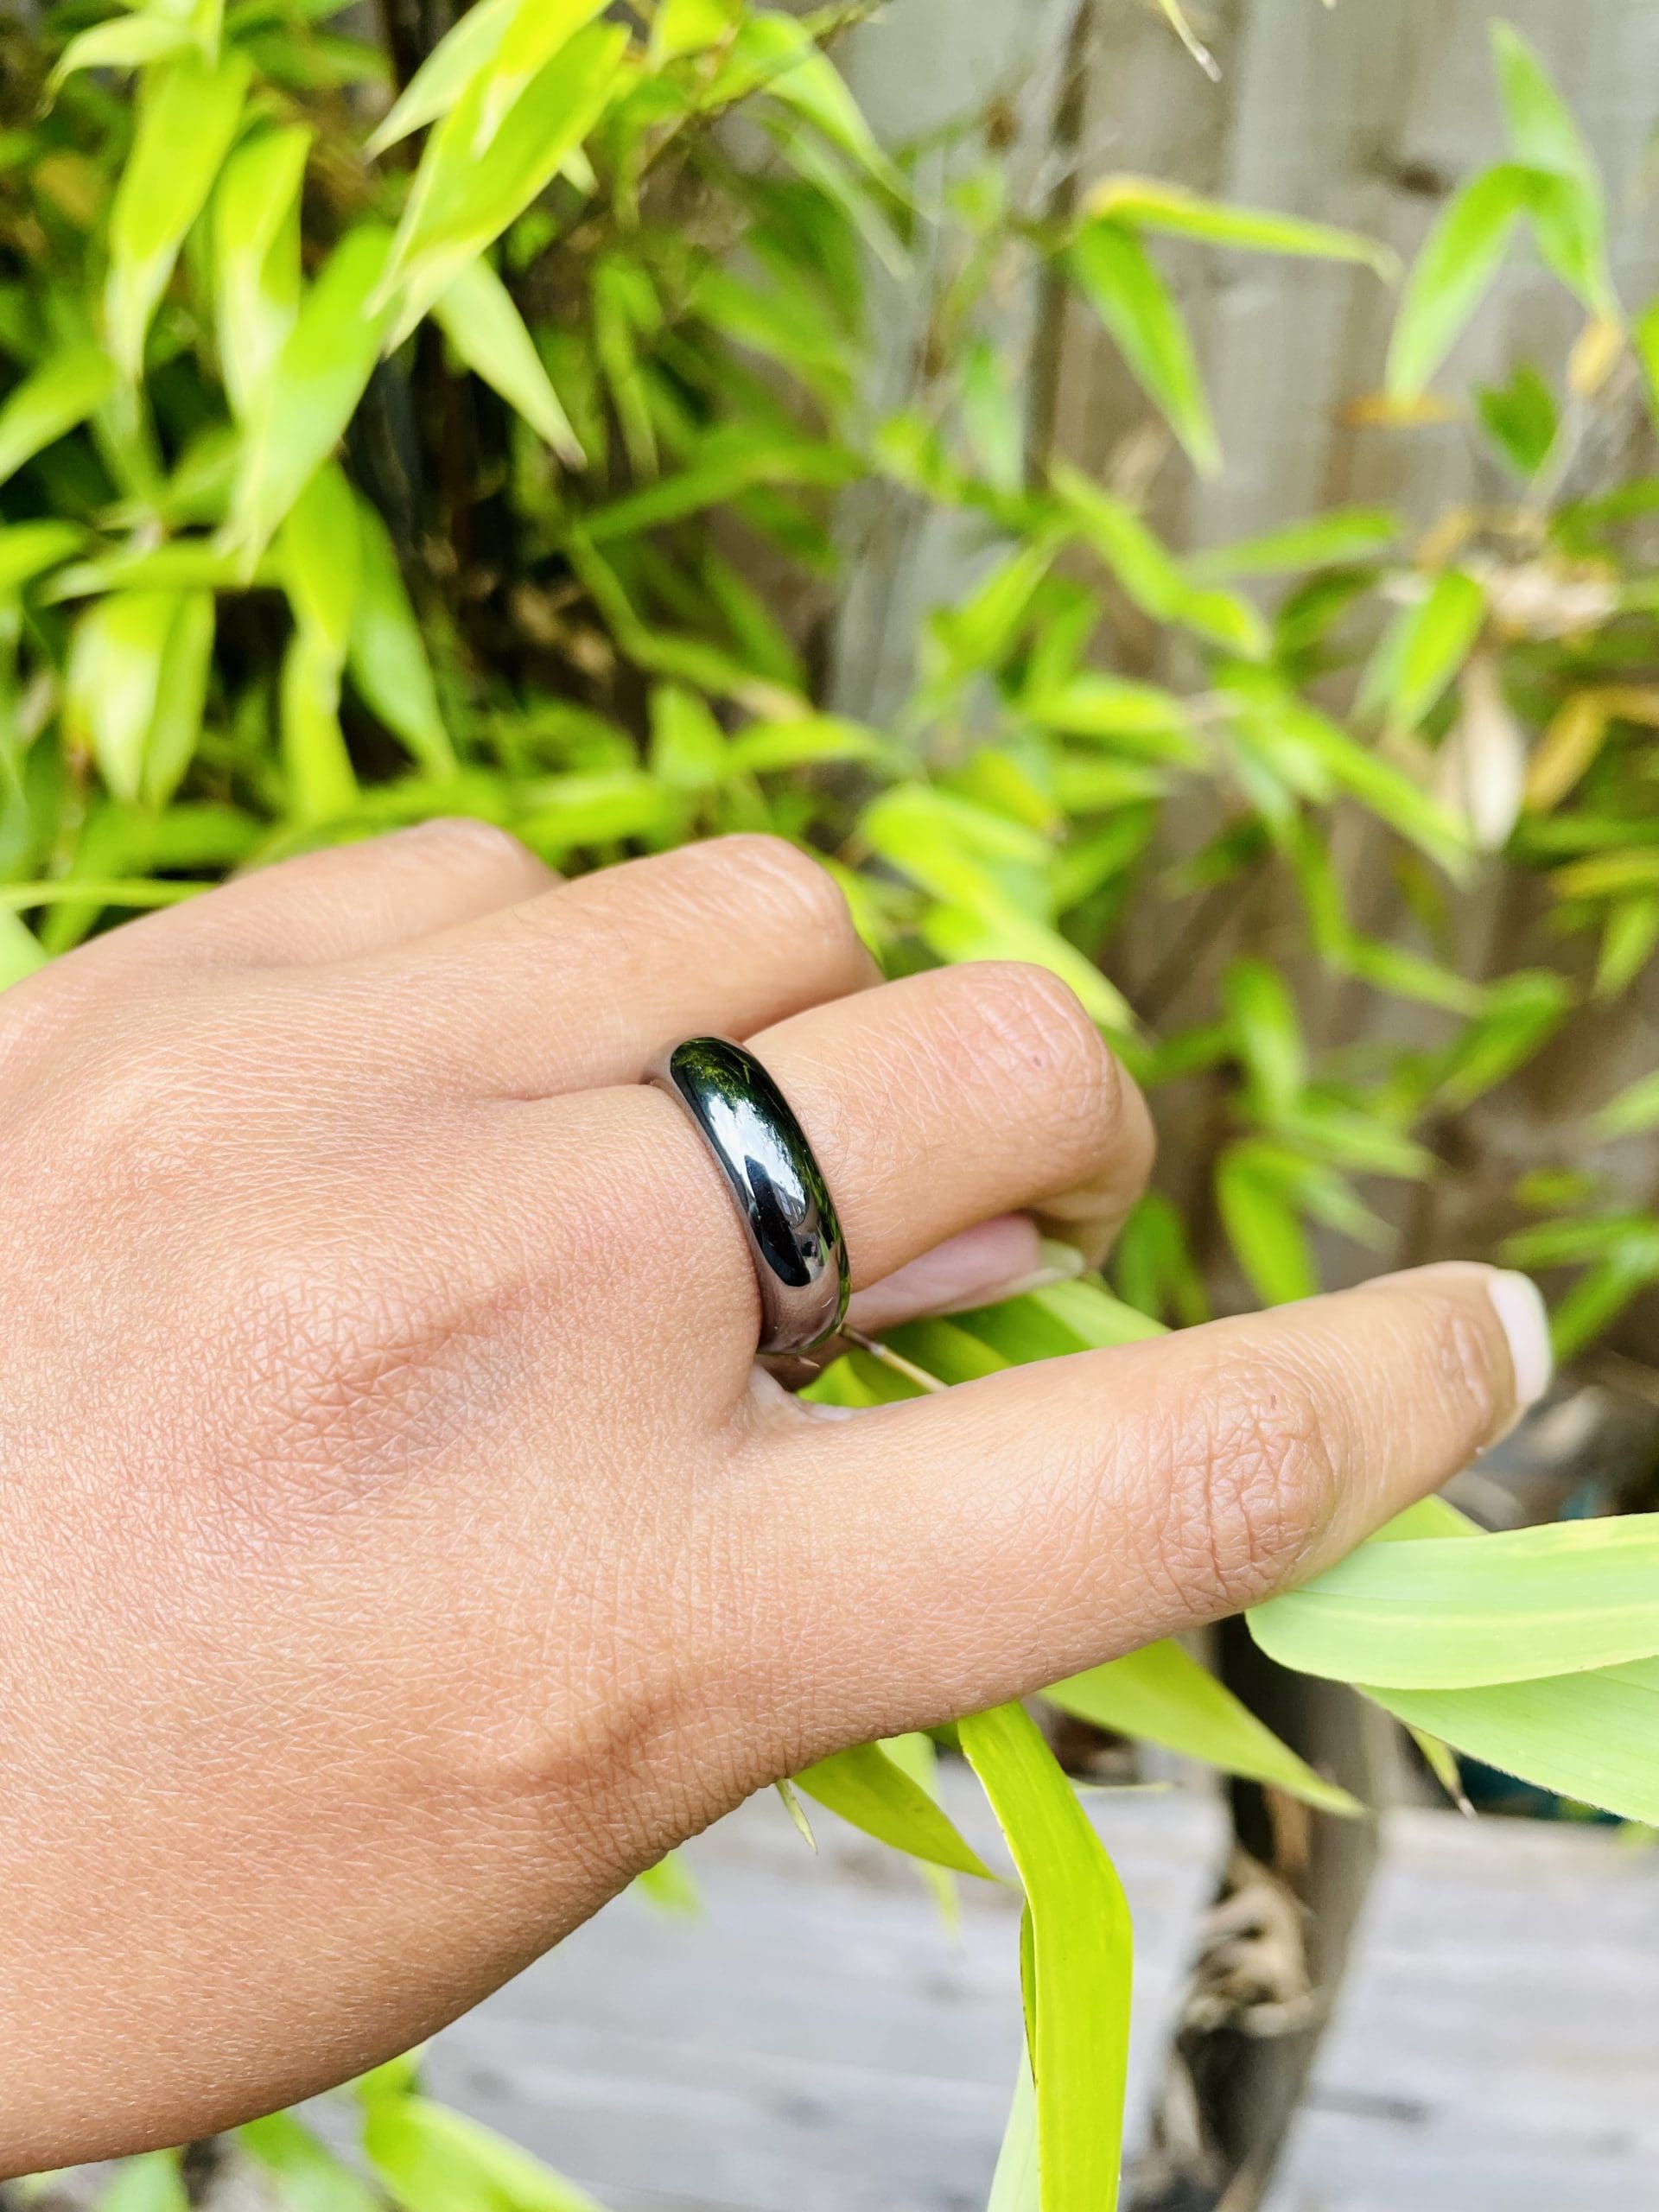 Hematite Magnetic Ring - Supports pain relief '10